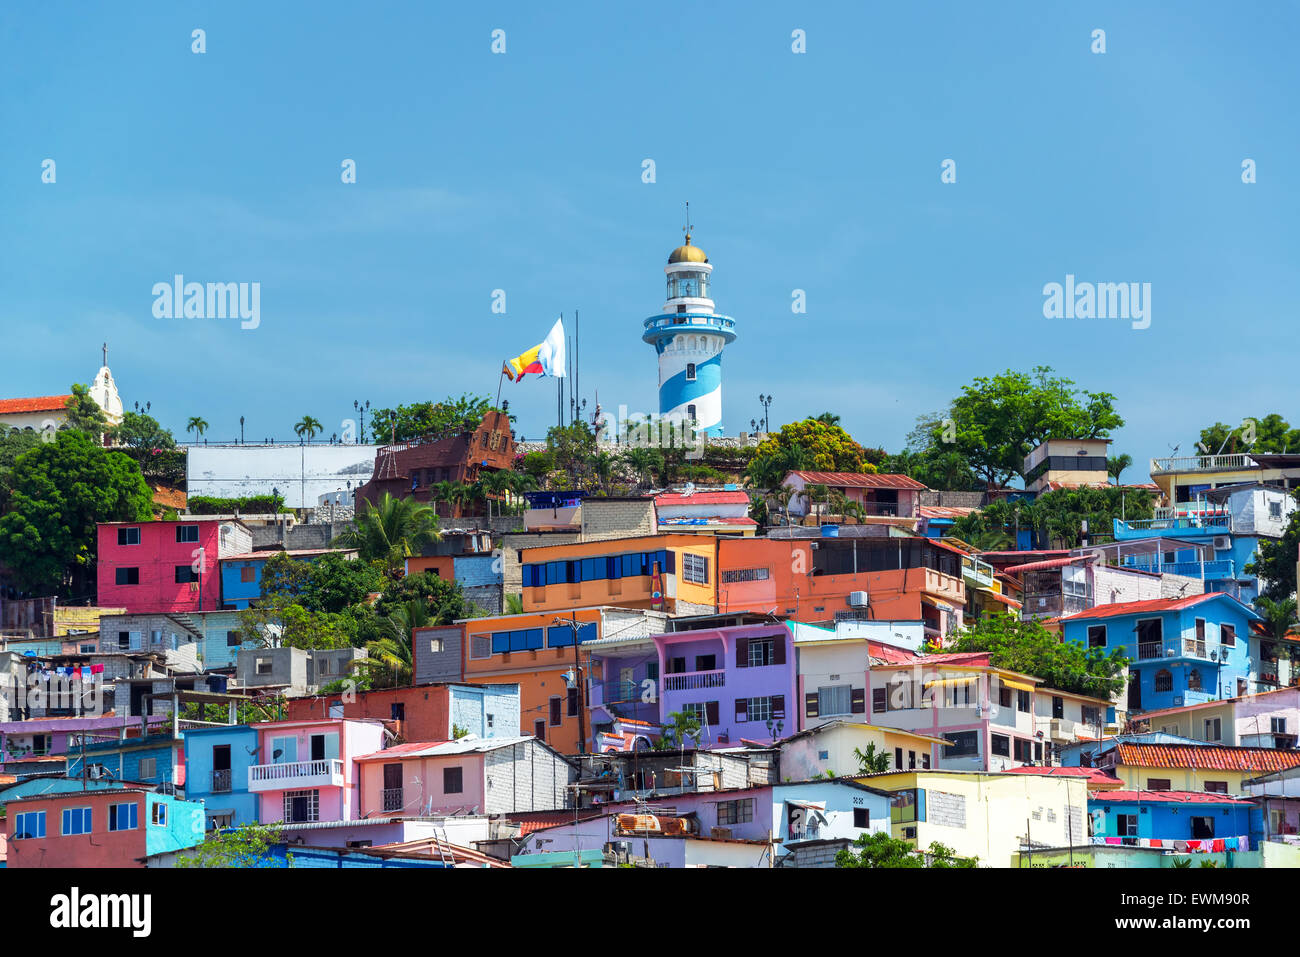 View of Santa Ana hill and the Las Penas neighborhood in Guayaquil, Ecuador with a lighthouse on top Stock Photo